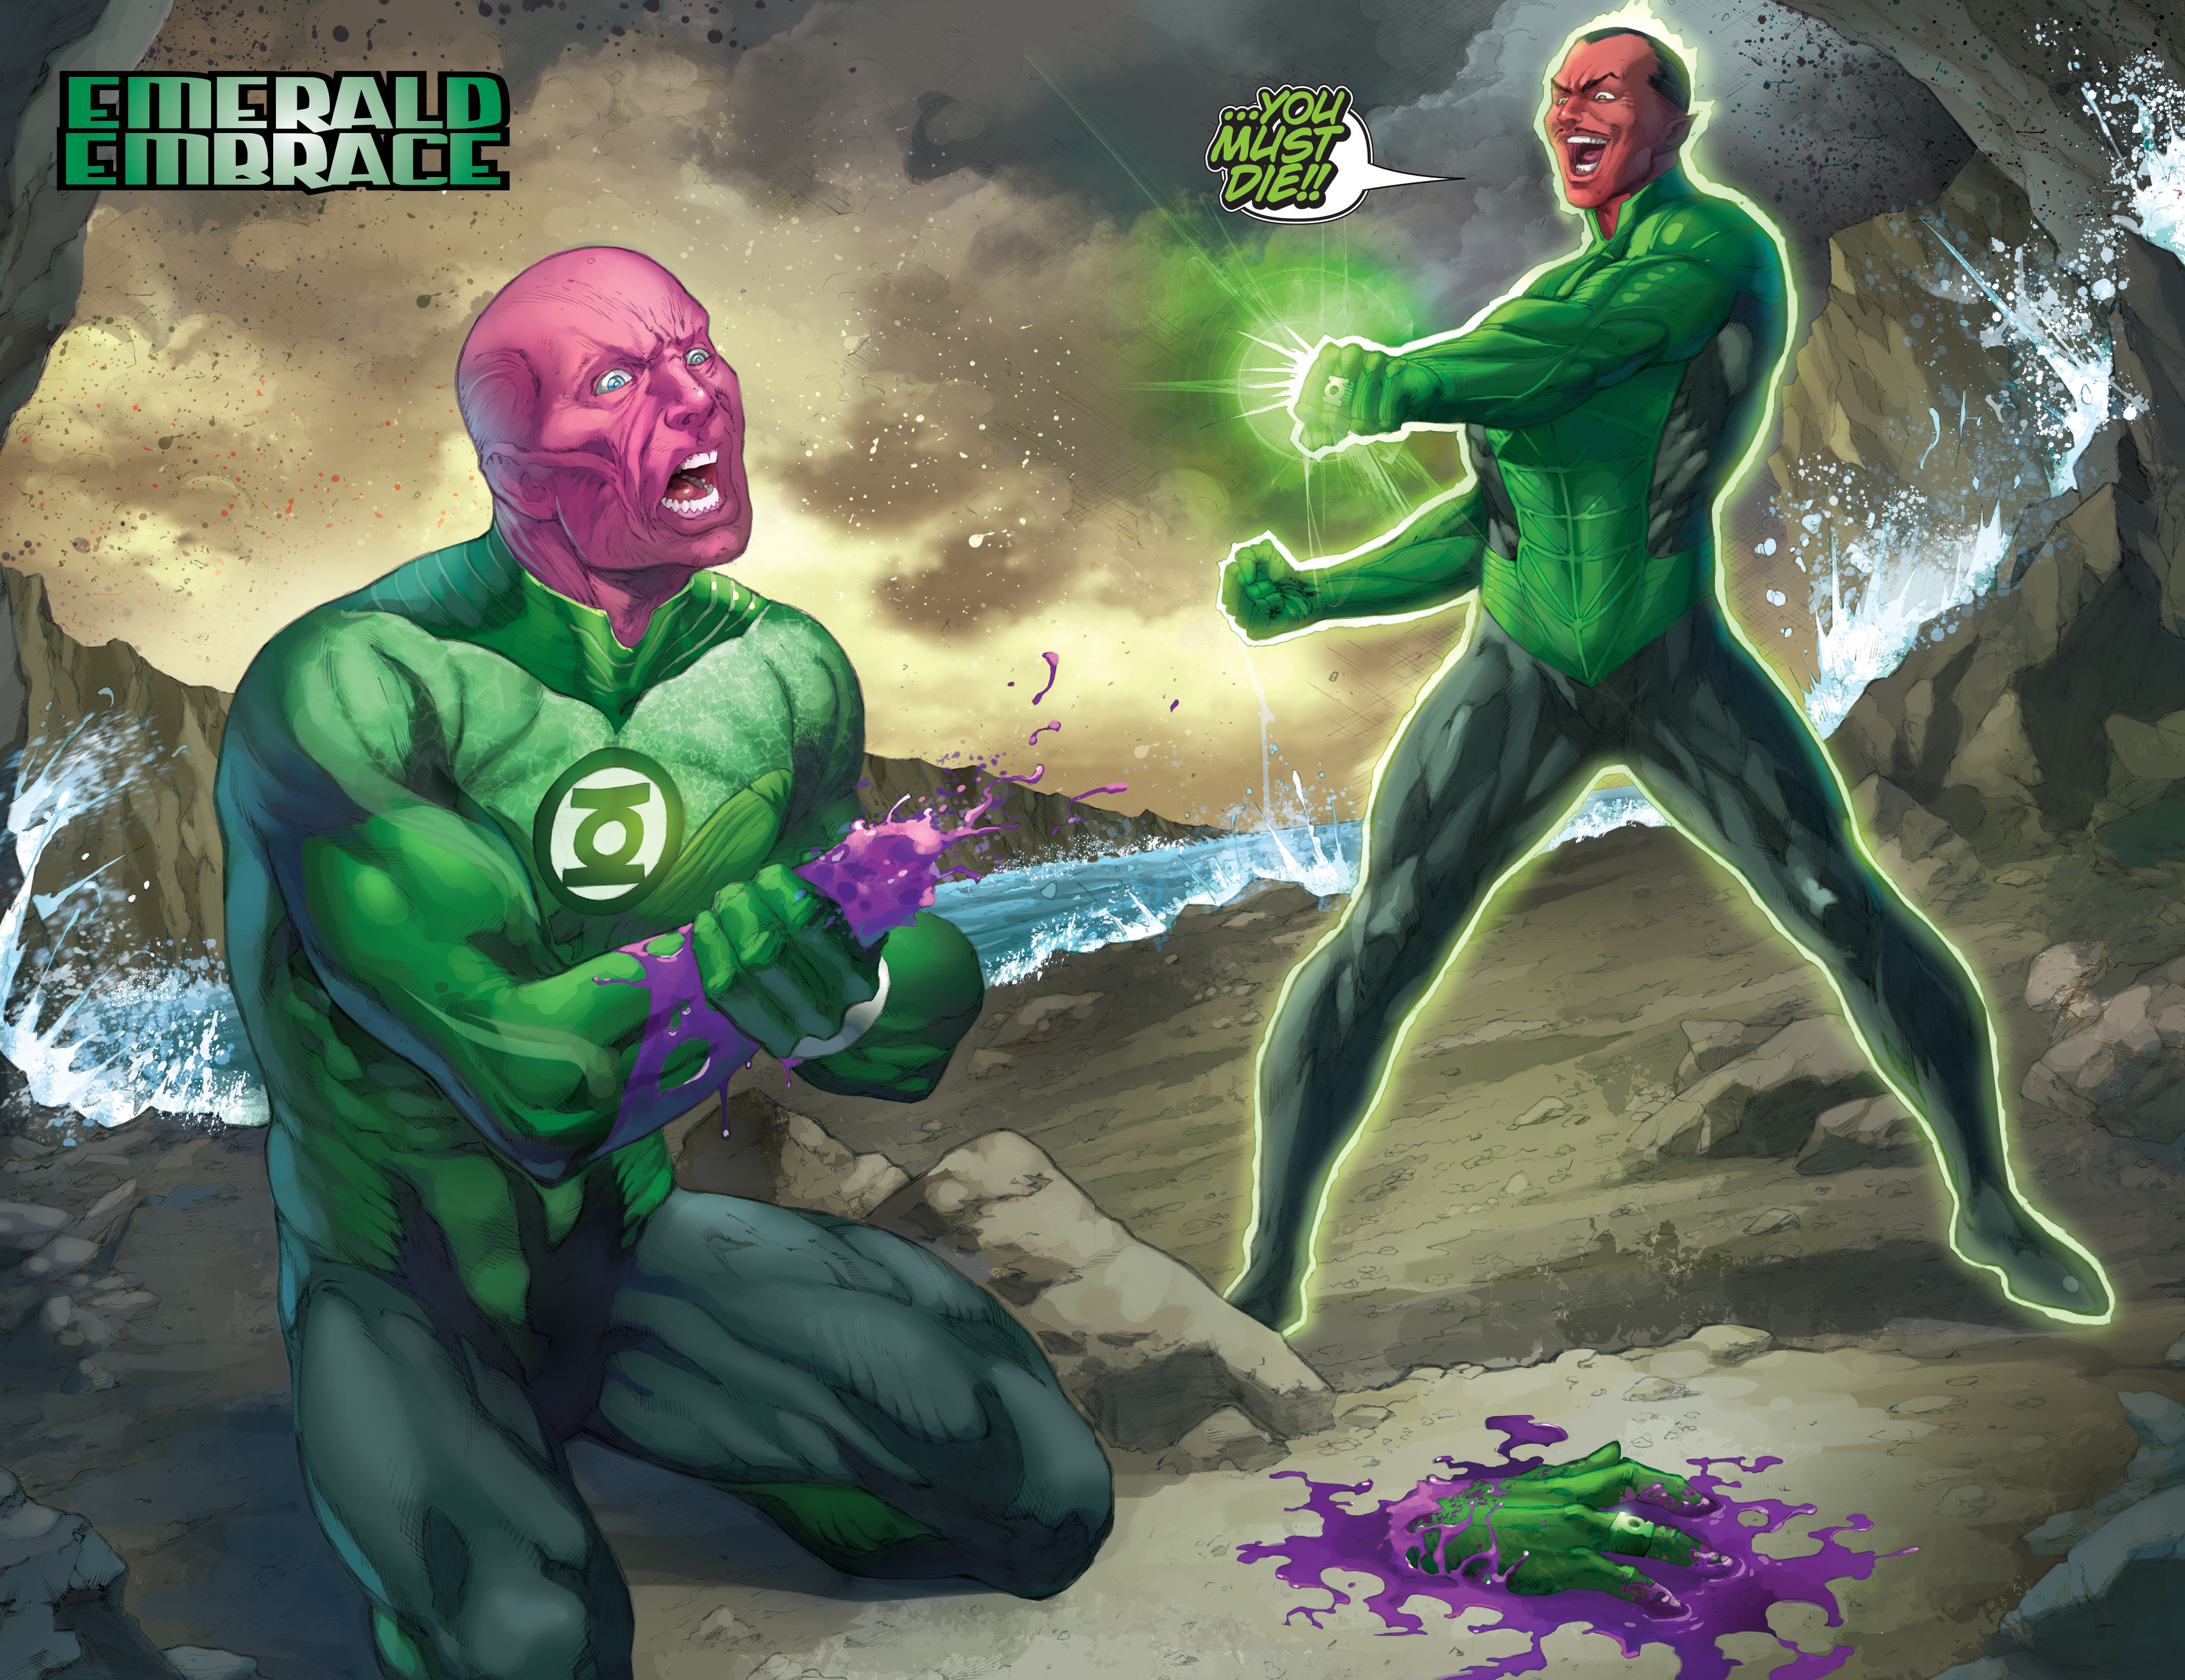 Flashpoint: The World of Flashpoint Featuring Green Lantern Full #1 - English 46